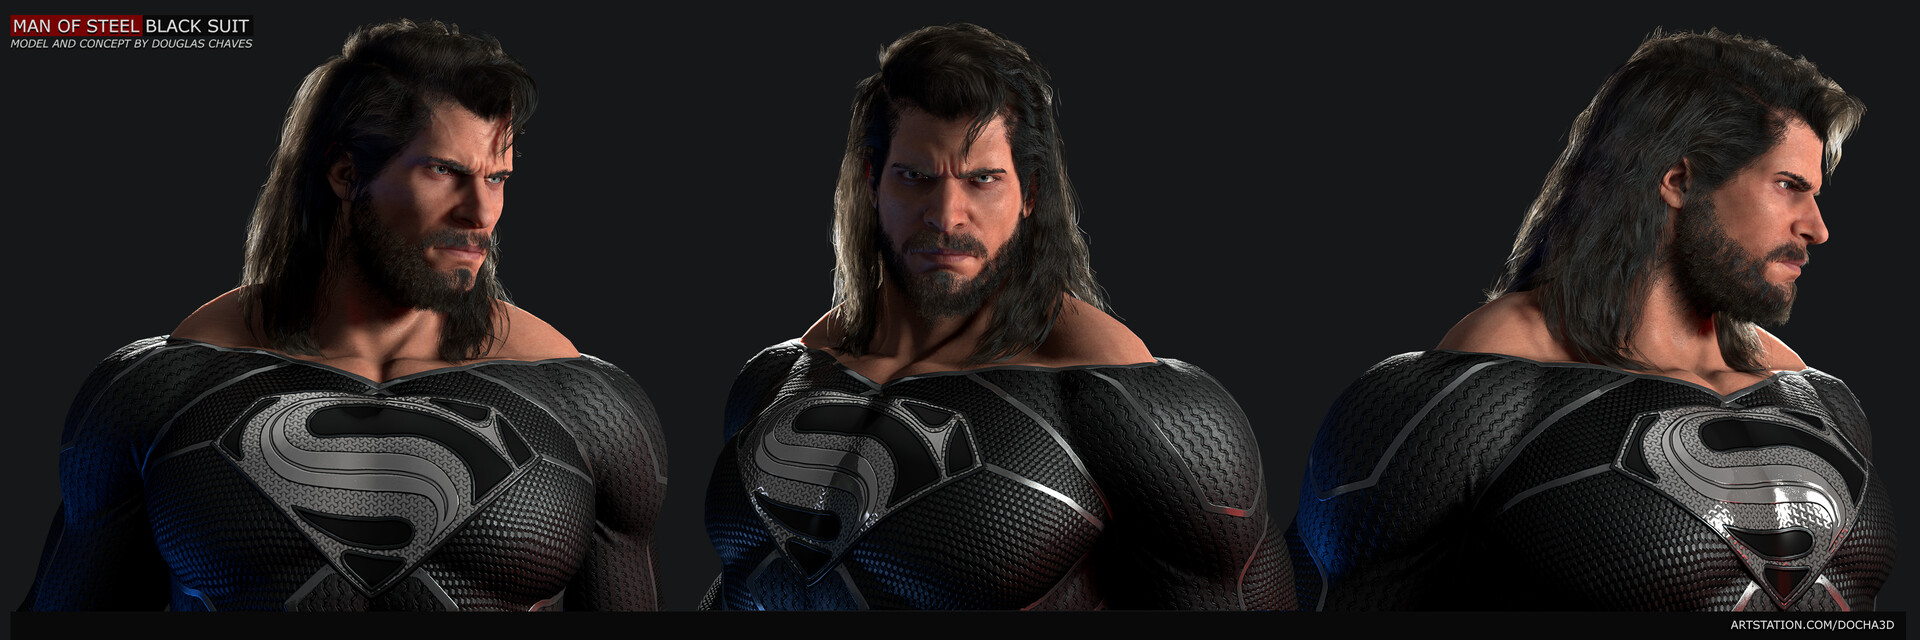 Man of Steel Black Suit by Douglas Chaves · 3dtotal · Learn, Create